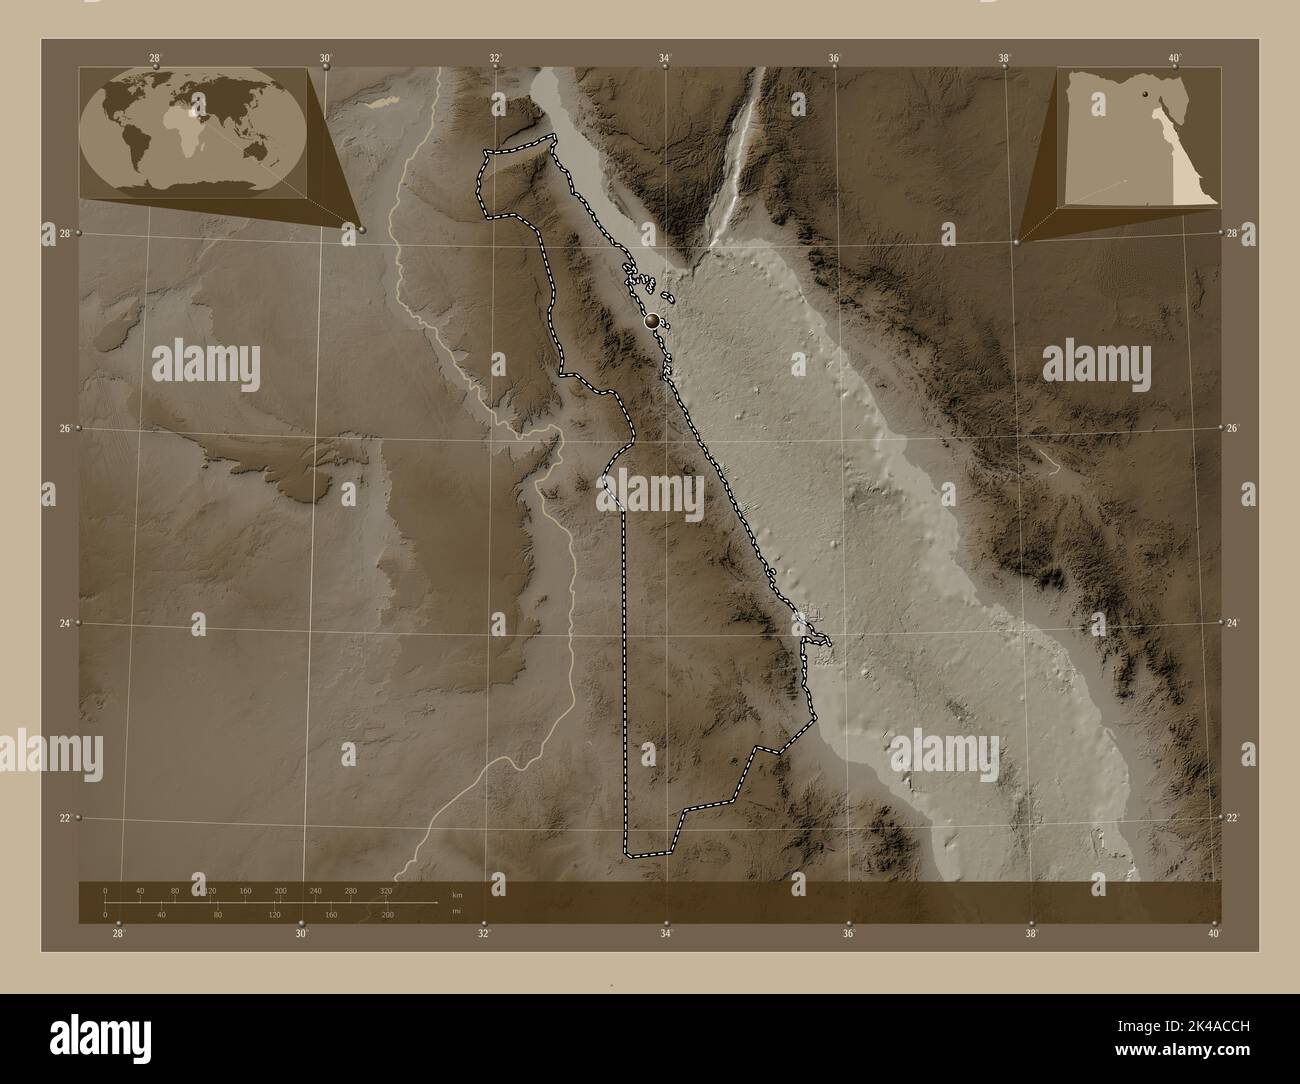 Al Bahr al Ahmar, governorate of Egypt. Elevation map colored in sepia tones with lakes and rivers. Corner auxiliary location maps Stock Photo